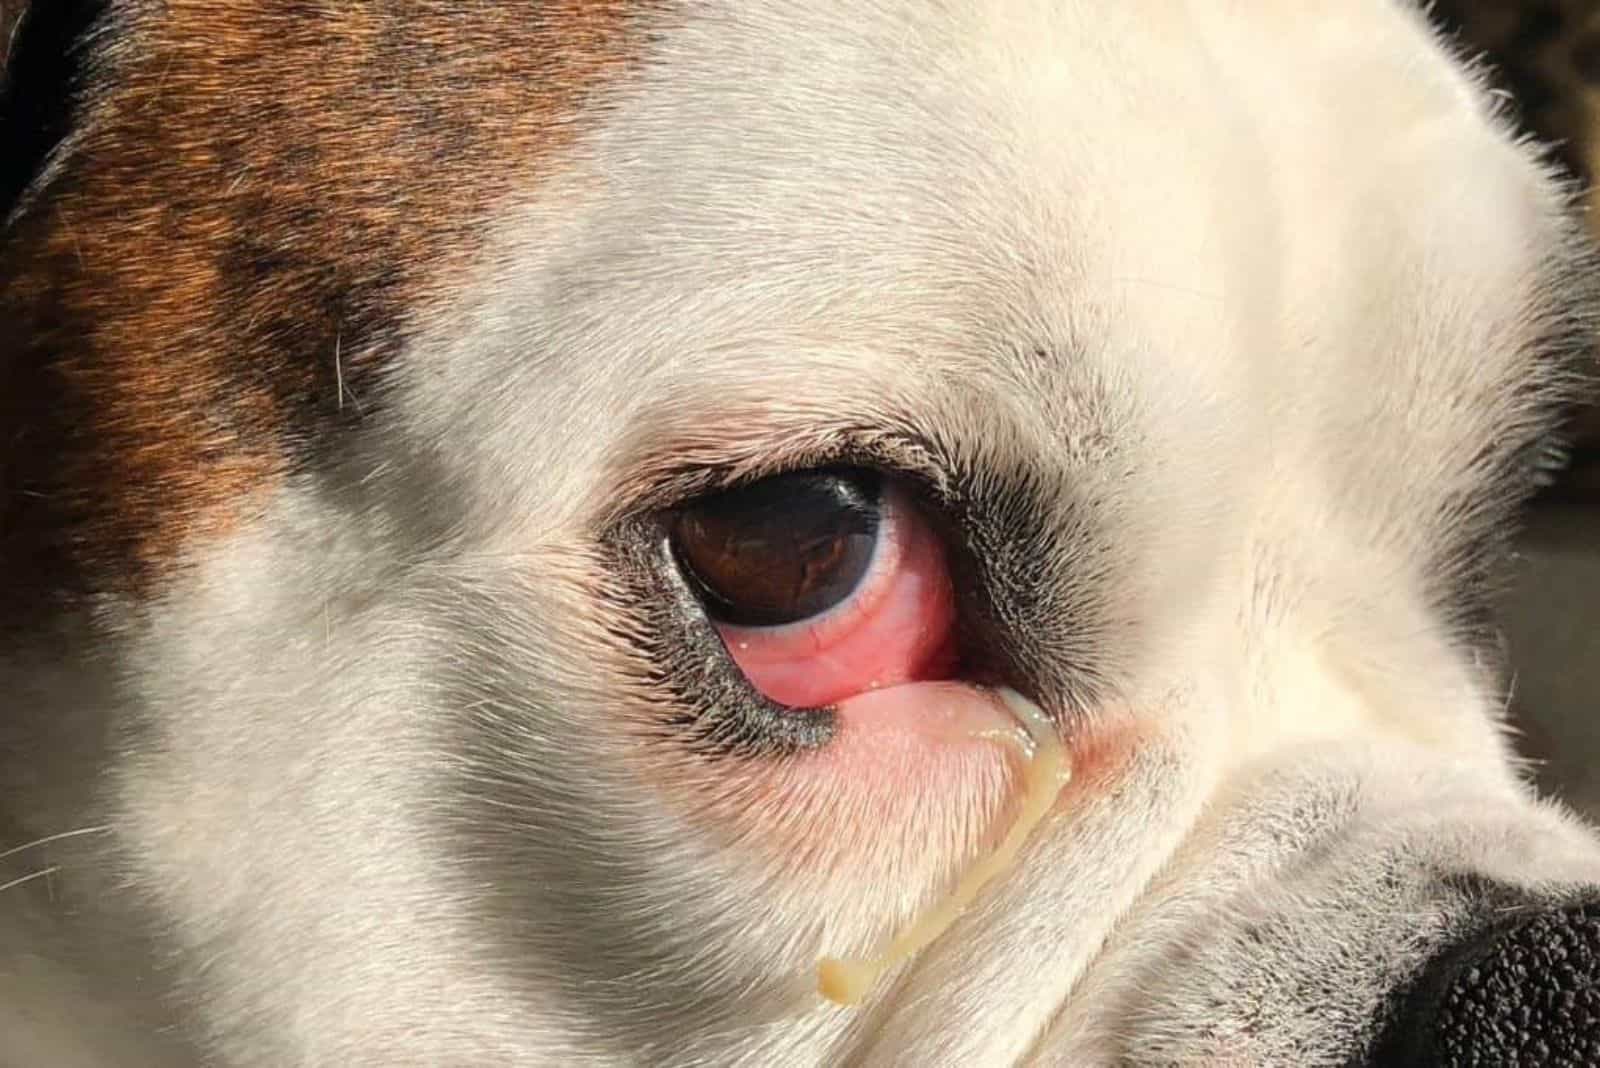 the sick dog has red eyes and oozes pus